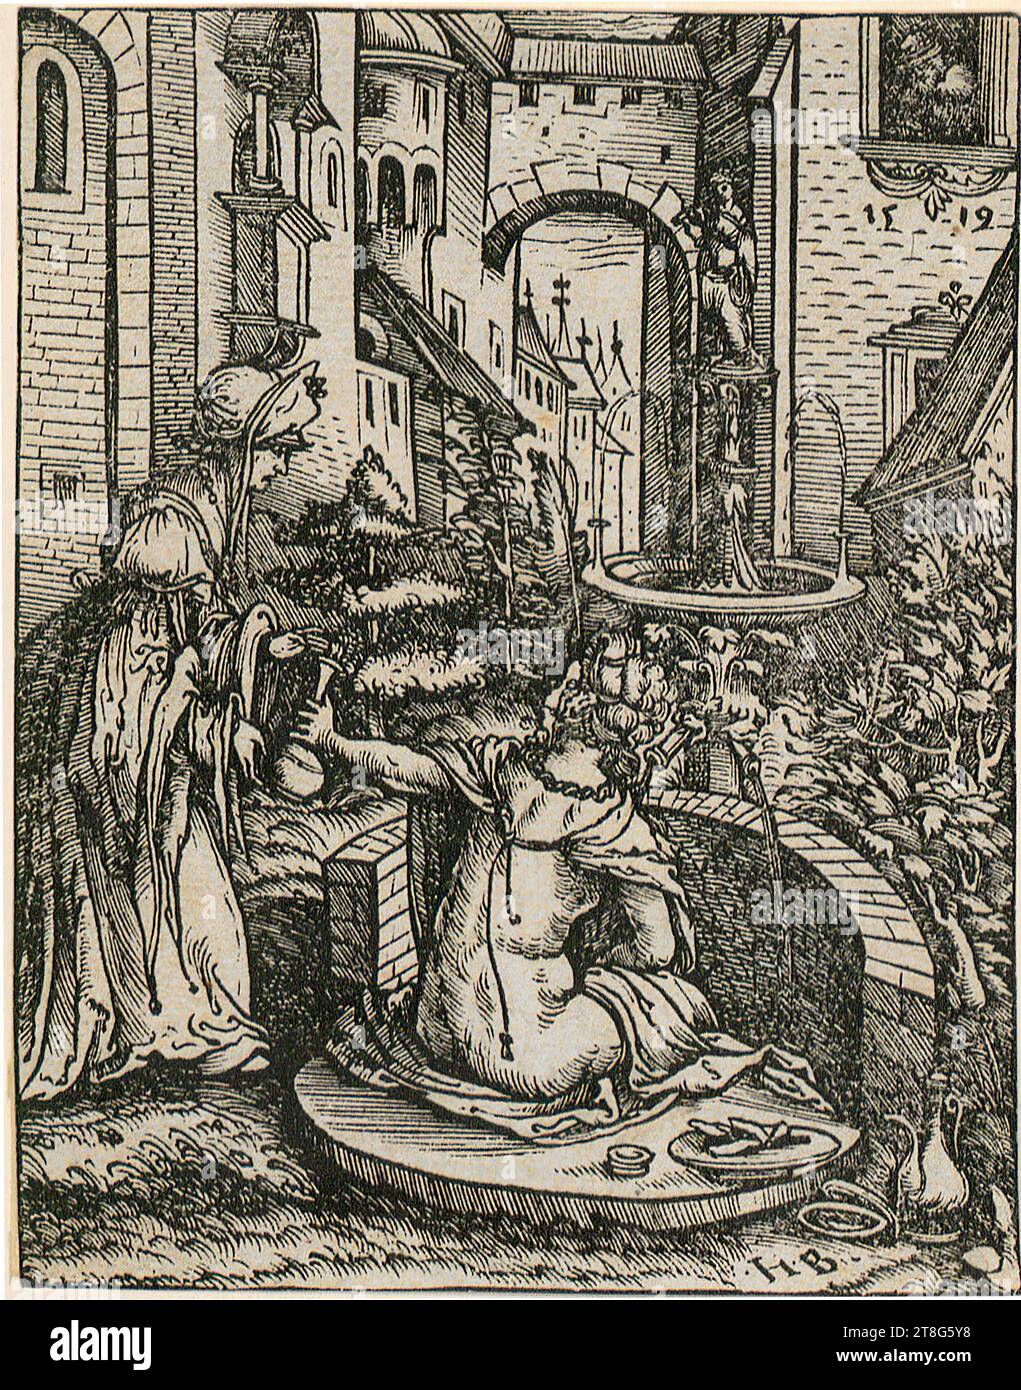 Hans Burgkmair (1473 - 1531), Bathsheba in the Bath, print medium creation: 1519, woodcut, sheet size: 11.9 x 9.2 cm, top right on wall dated '1519' and bottom right monogrammed 'H . B . ', dealer's note with graphite '24609, RZ' on verso lower left; black Stock Photo